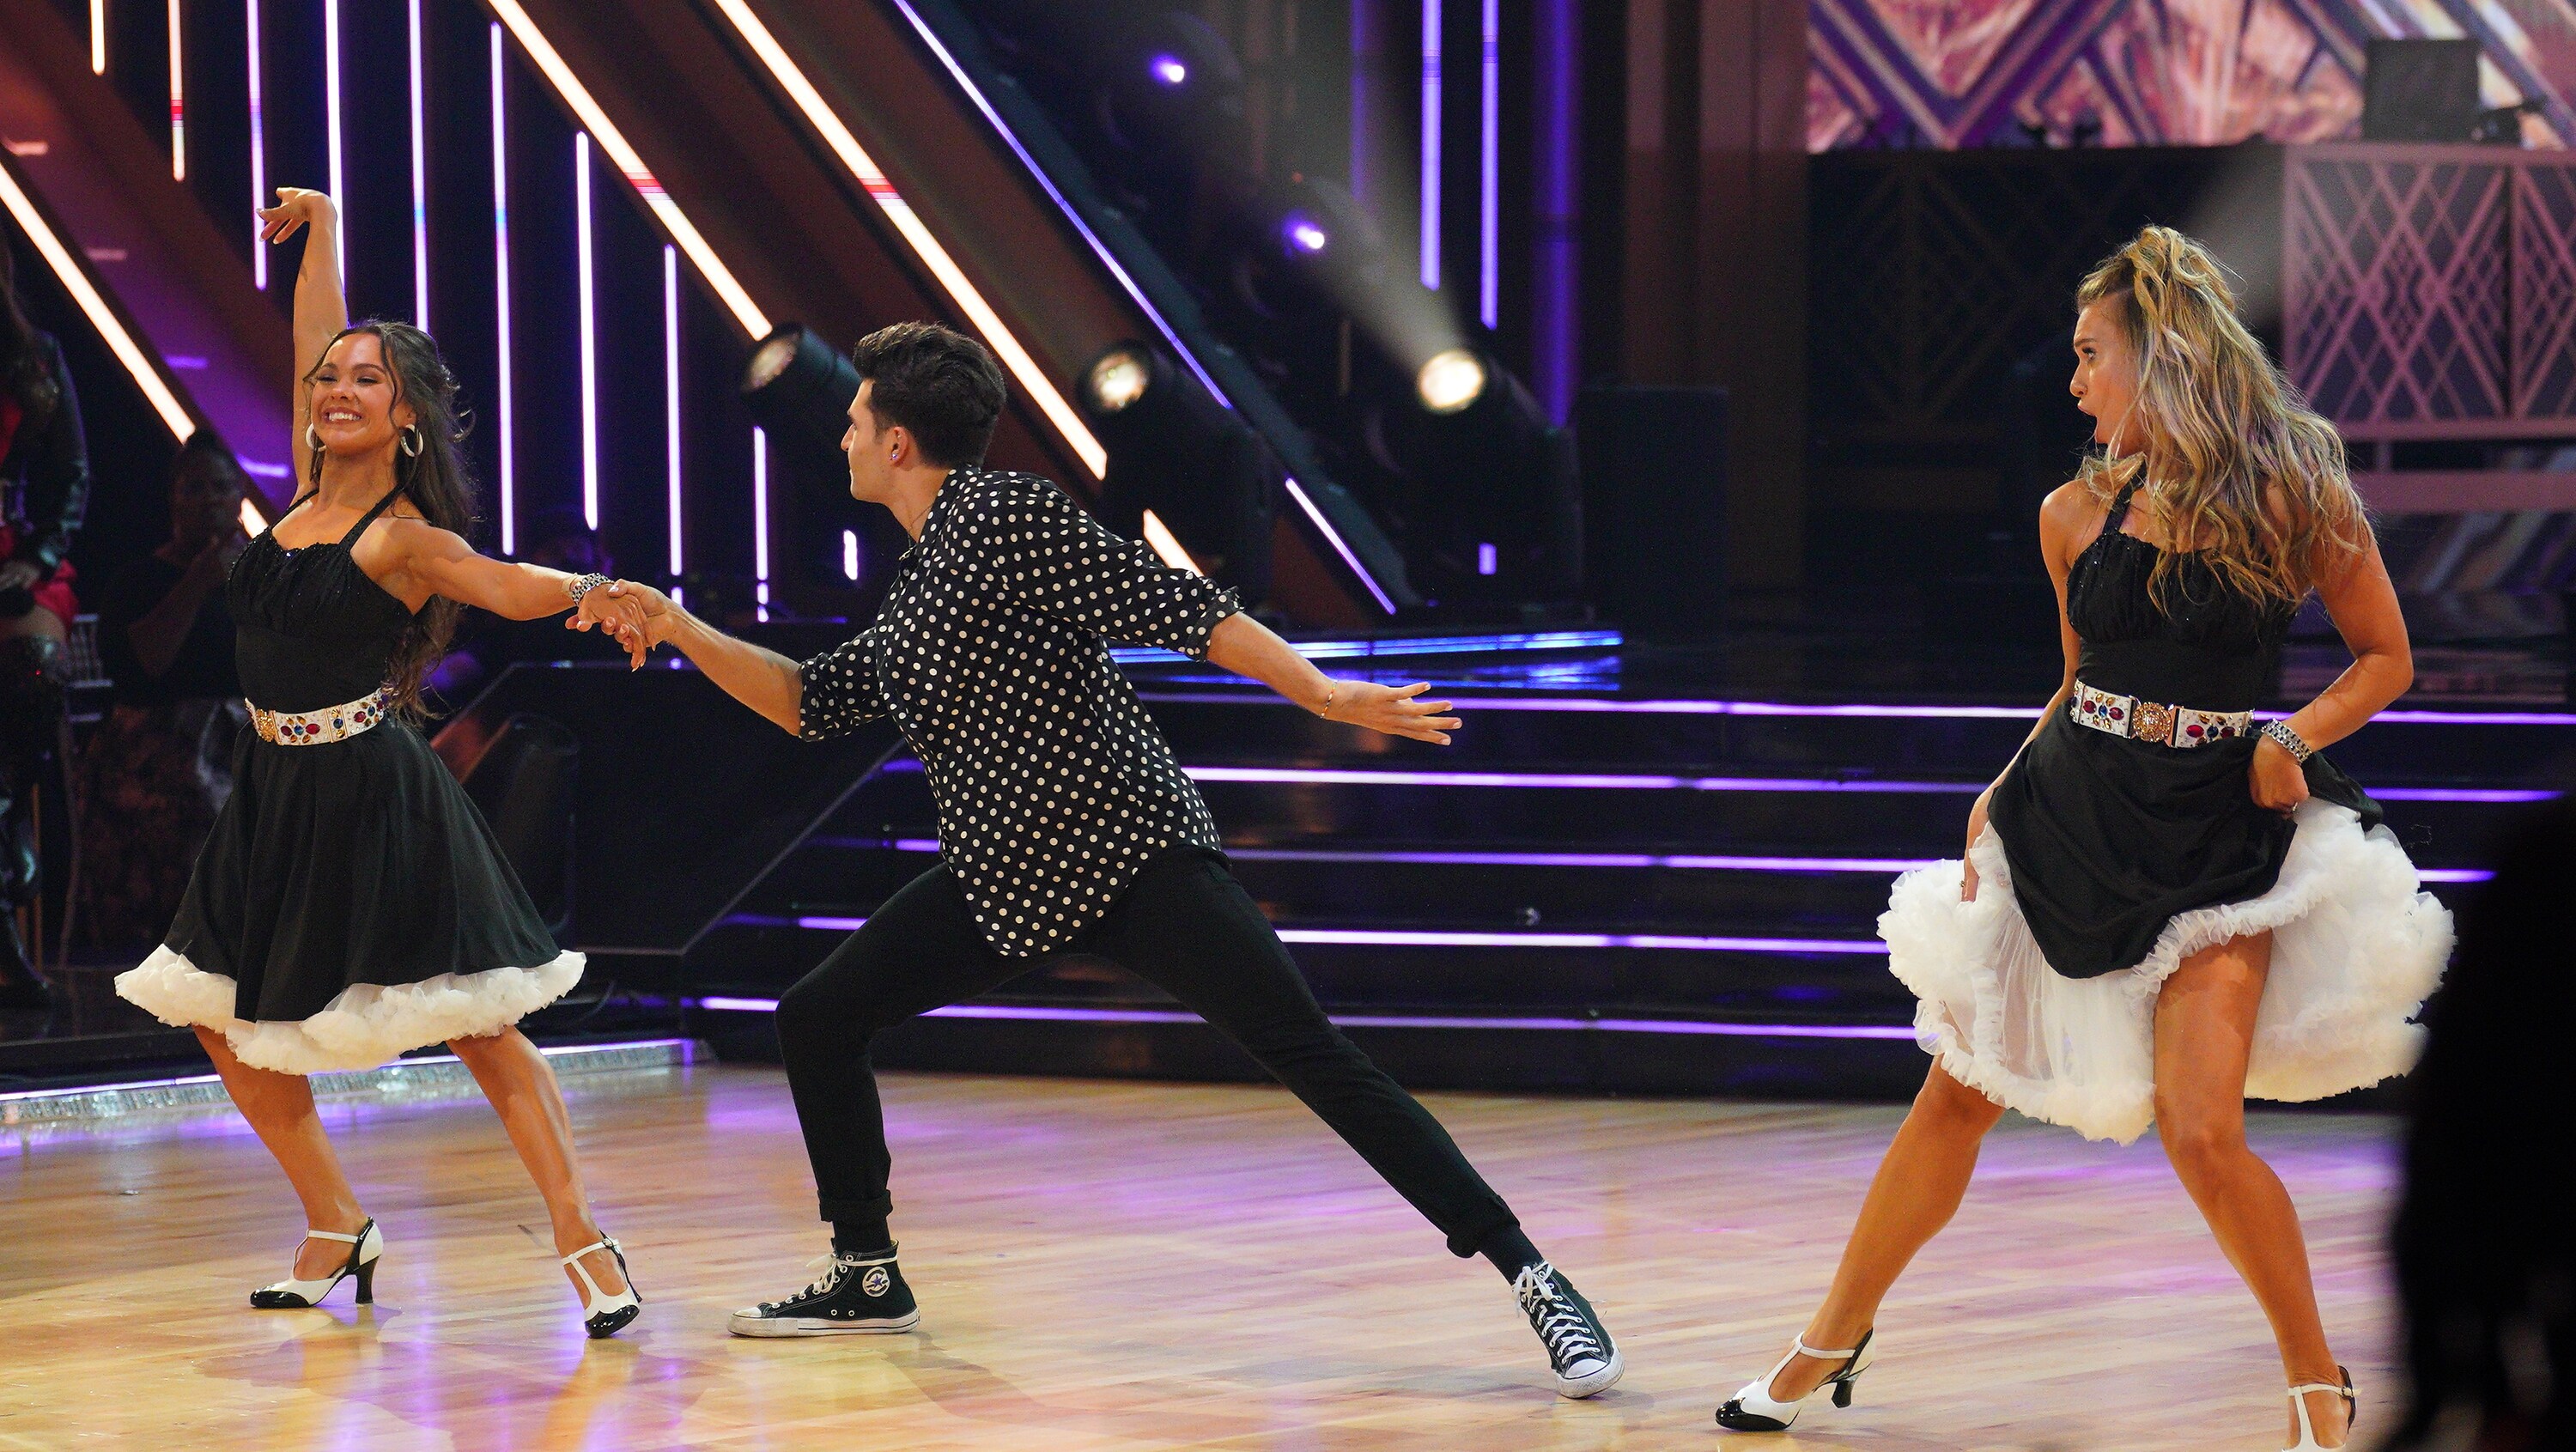 DANCING WITH THE STARS - “Elvis Night” –  The 15 remaining couples “Can’t Help Falling in Love” with Elvis this week as they take on all-new dance styles to music by The King of Rock ‘n’ Roll. Week two of the mirorrball competition will stream live MONDAY, SEPT. 26 (8:00pm ET / 5:00pm PT), on Disney+. (ABC/Christopher Willard) ALEXIS WARR, EZRA SOSA, KATERYNA KLISHYNA